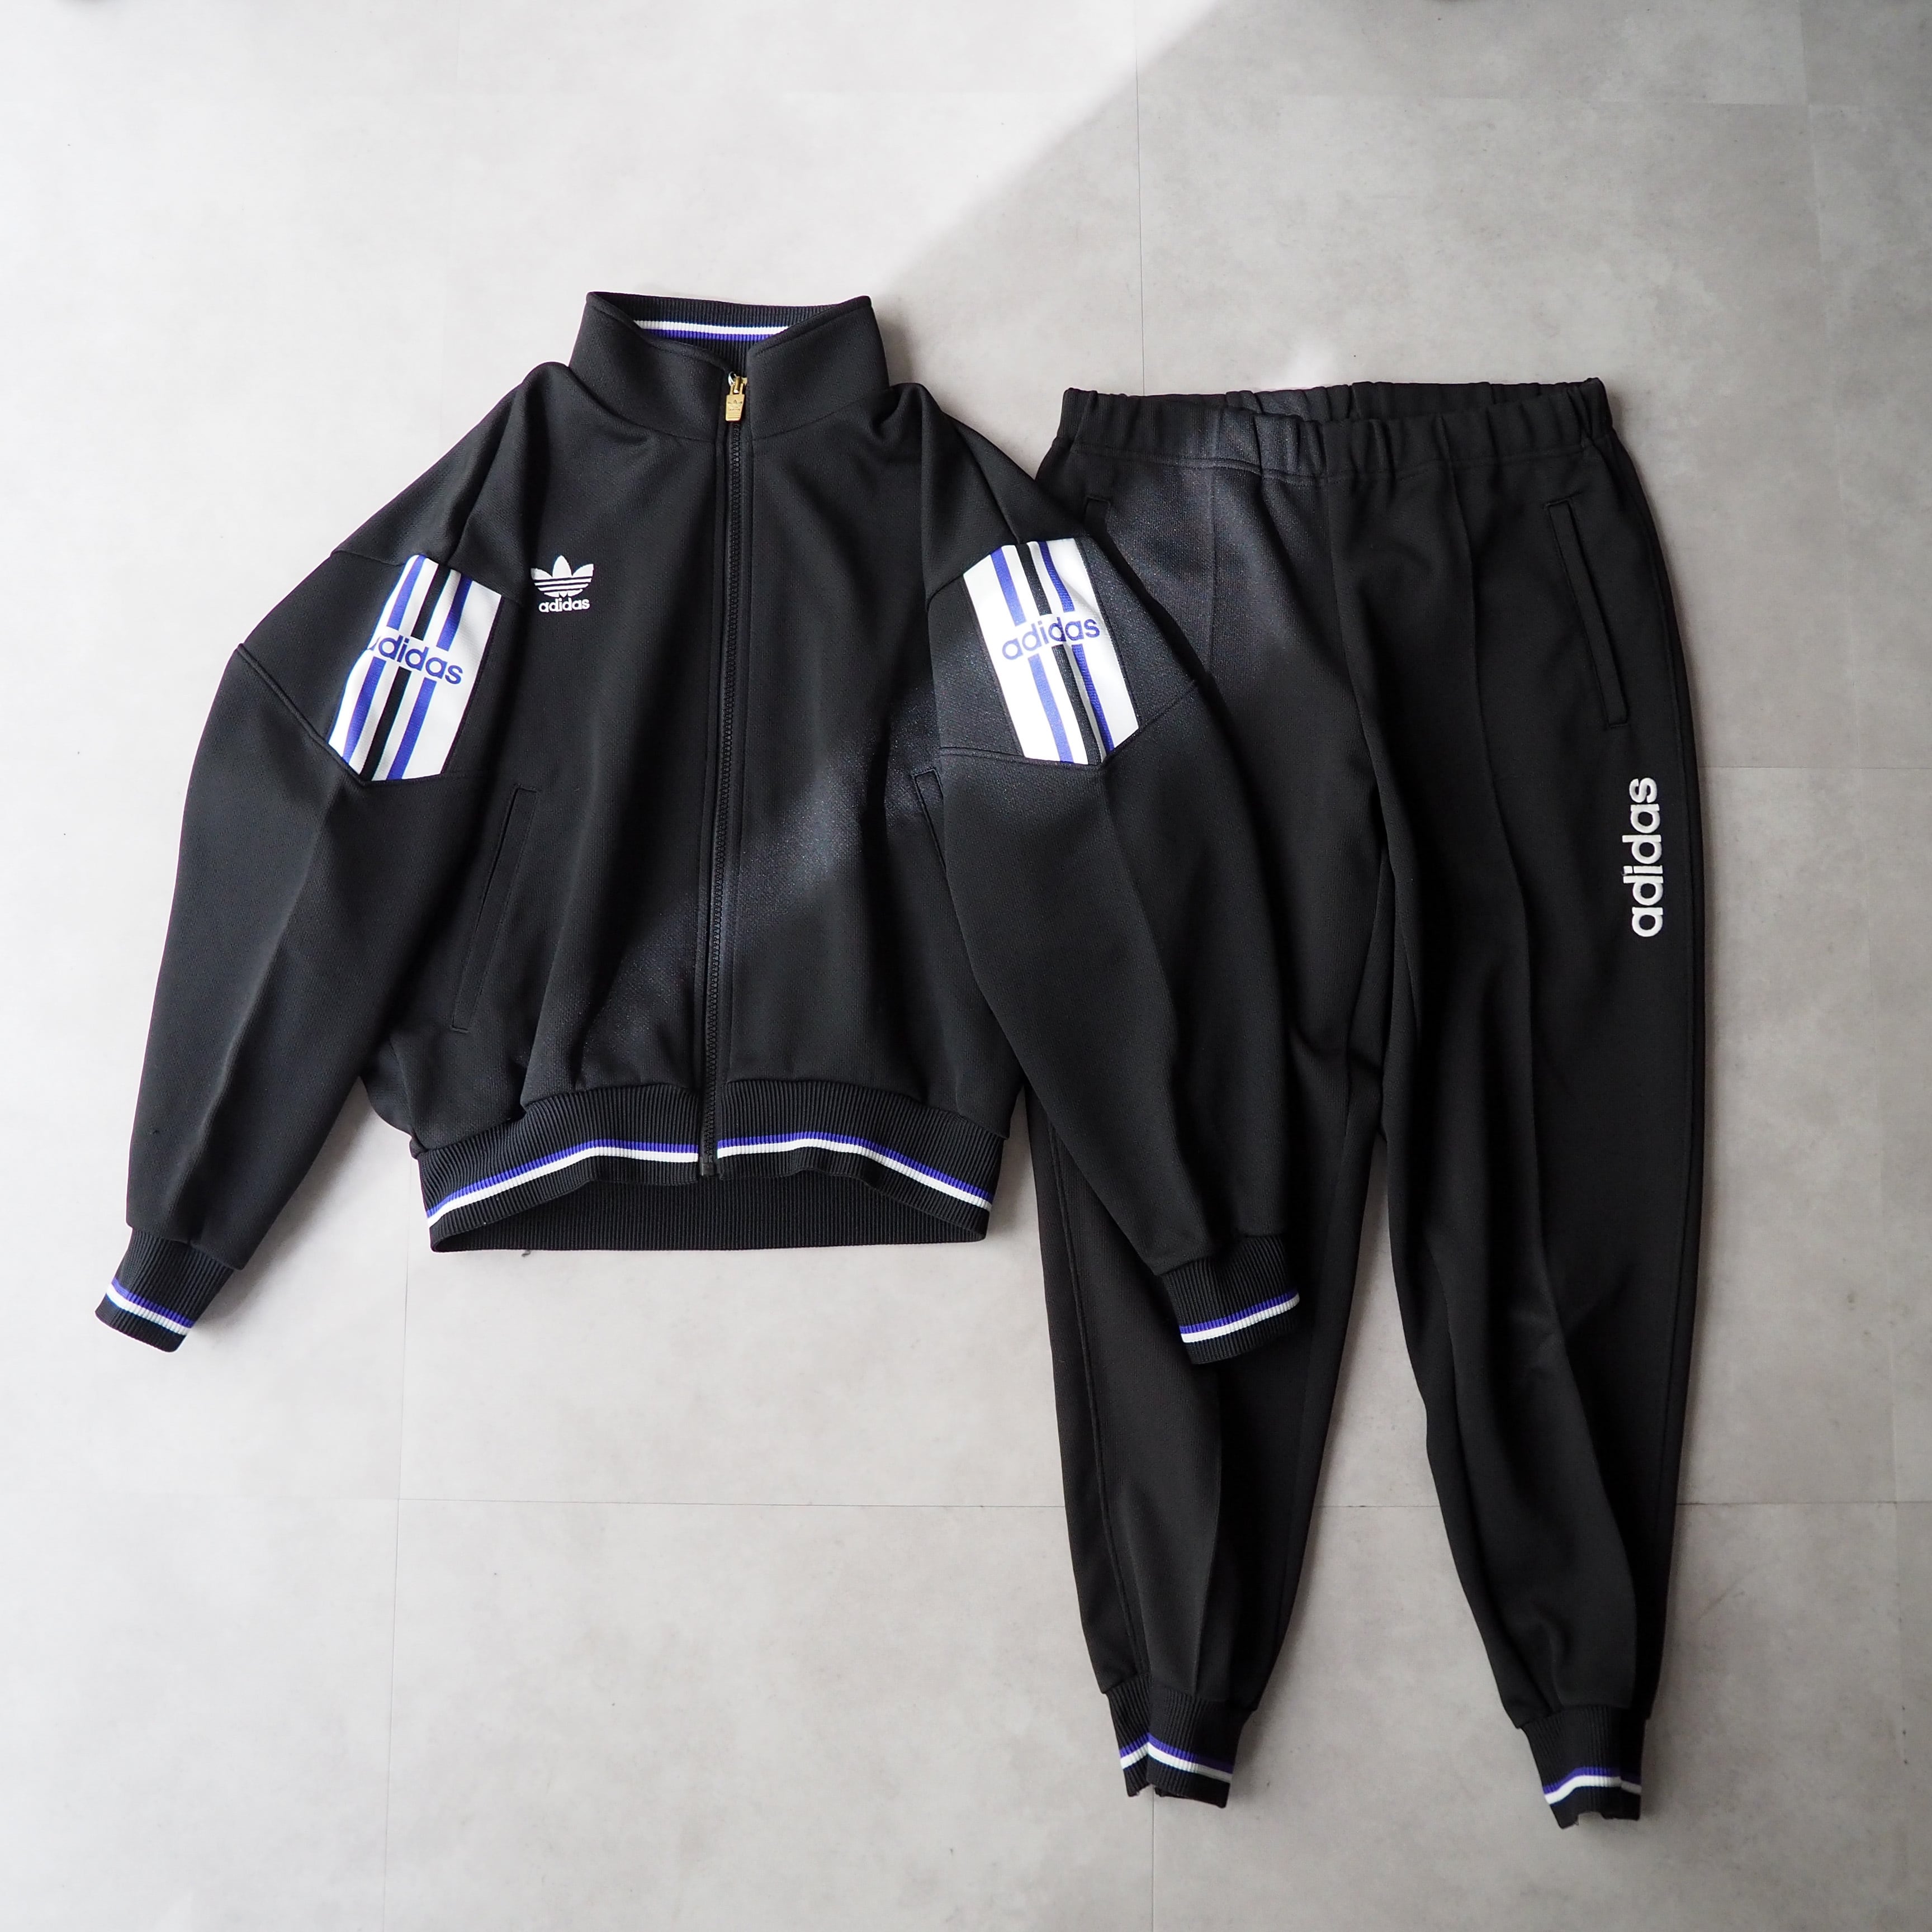 80s-90s “ADIDAS” by DESCENTE track jacket & pants set up 80年代 90